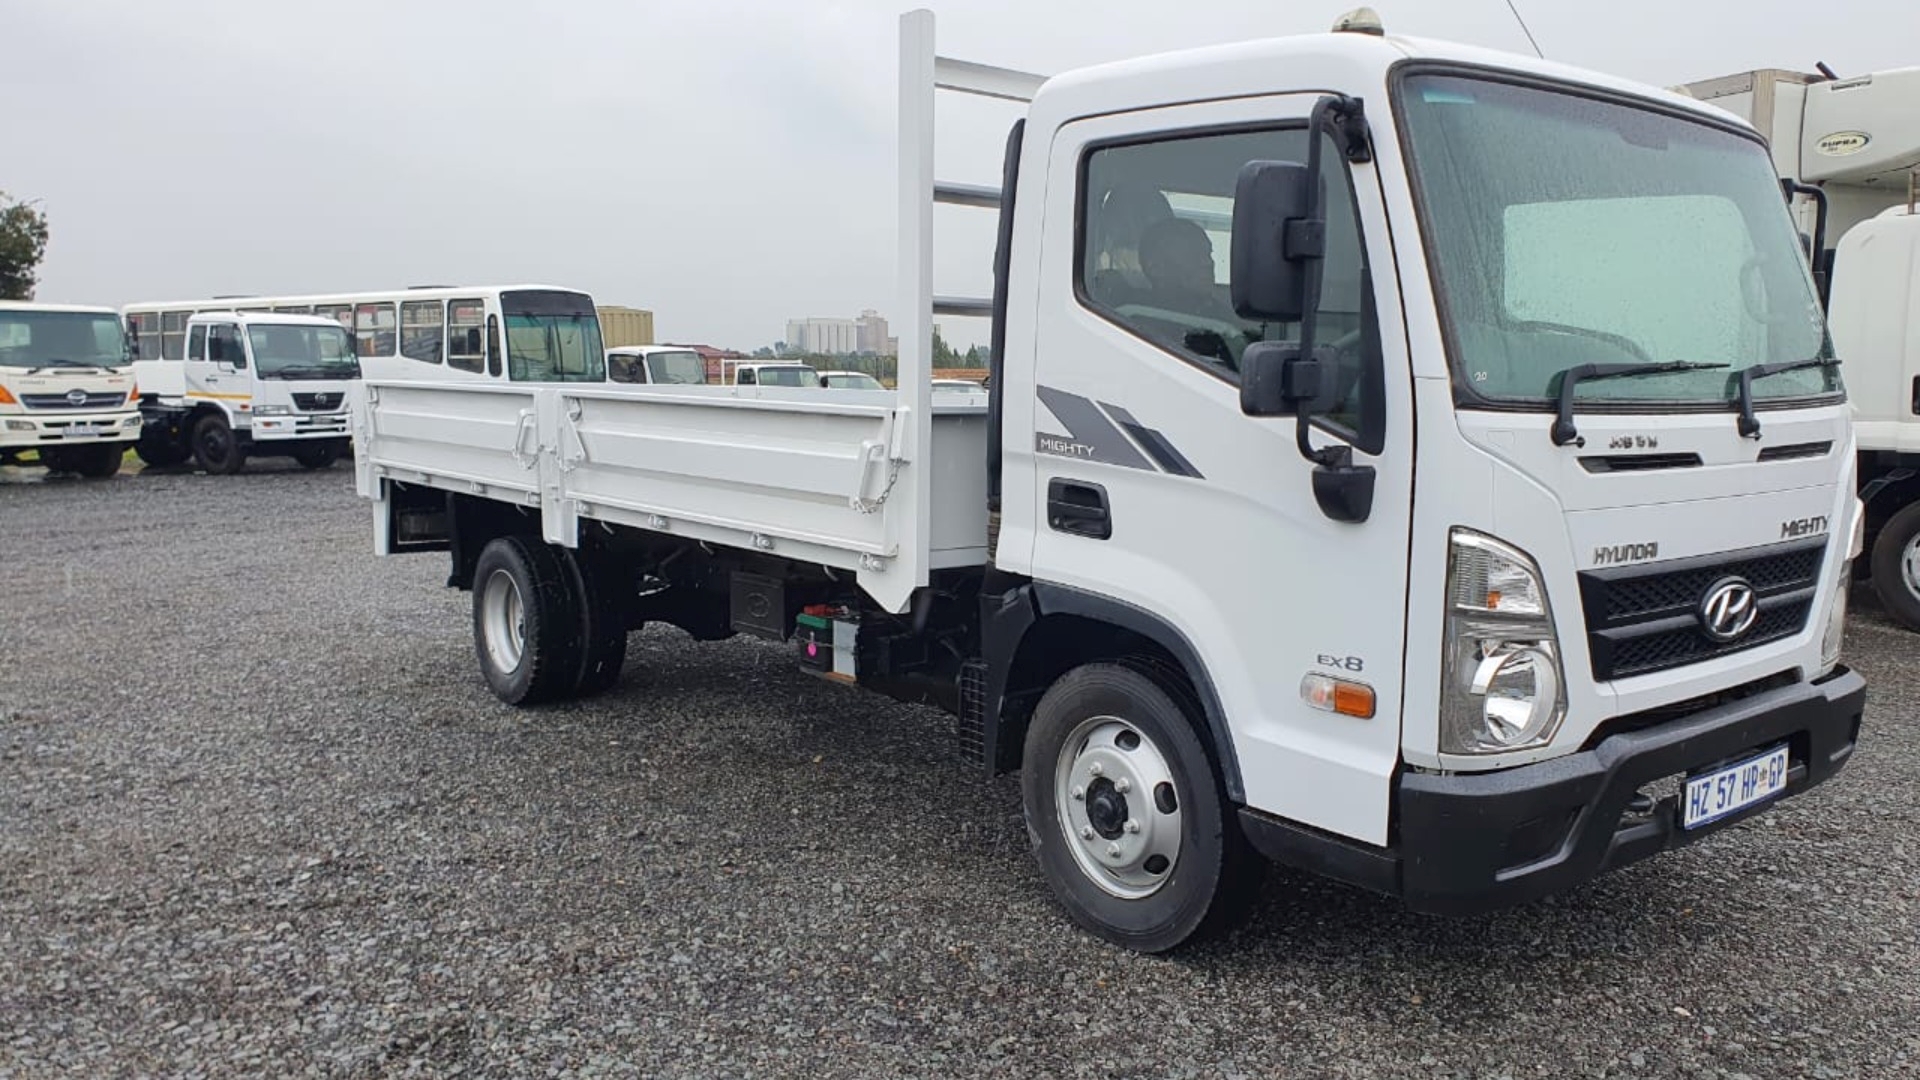 19 Hyundai Mighty Ex 8 Dropside Trucks For Sale In Gauteng R 449 900 On Agrimag